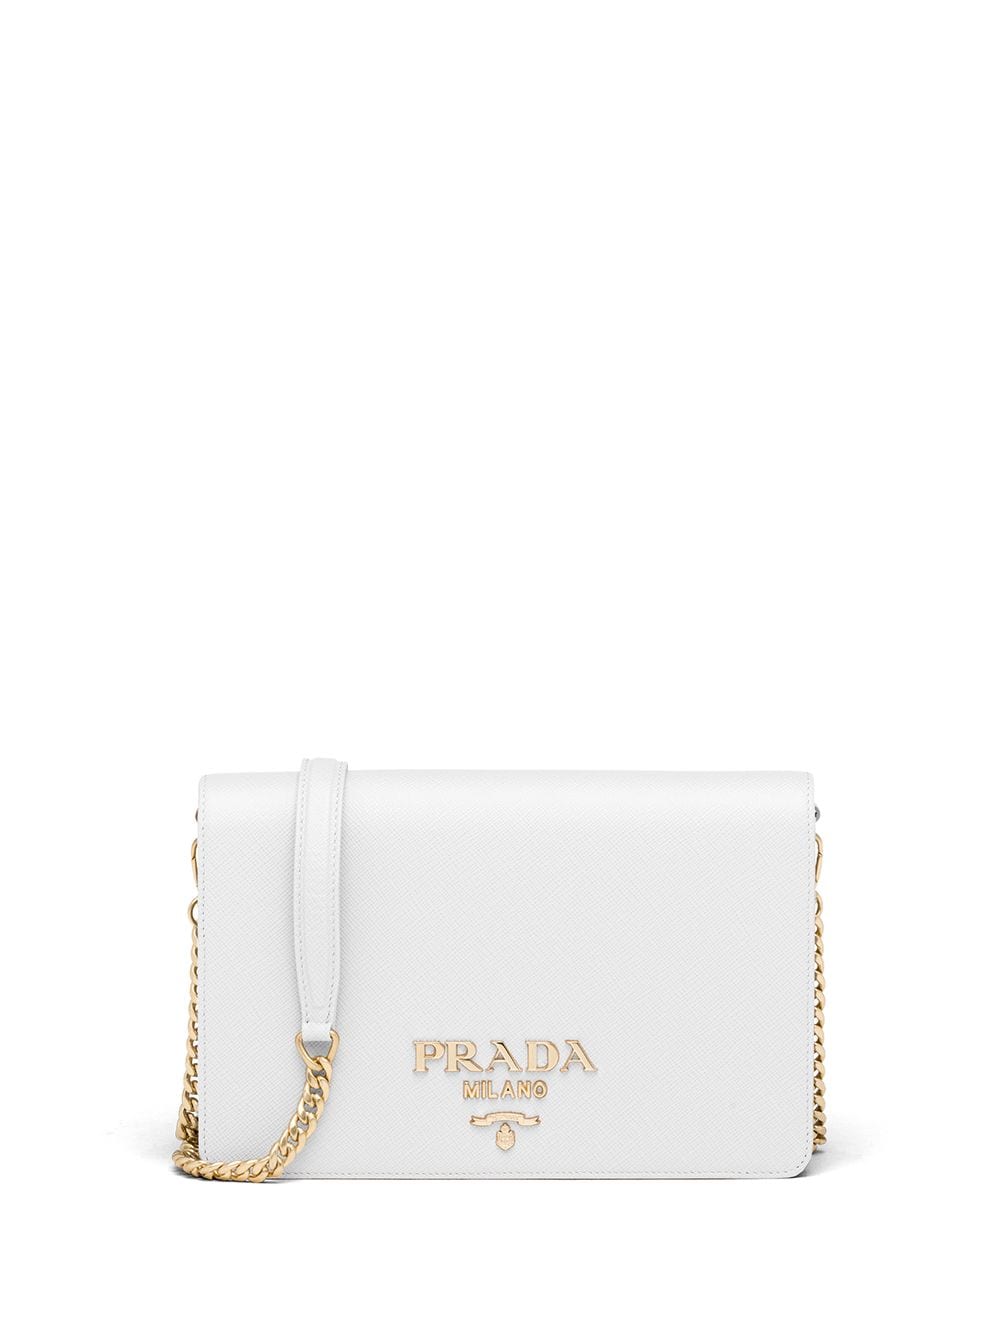 Is My Prada Bag Real? The New Way to Spot Fake Designer Purses - Bloomberg